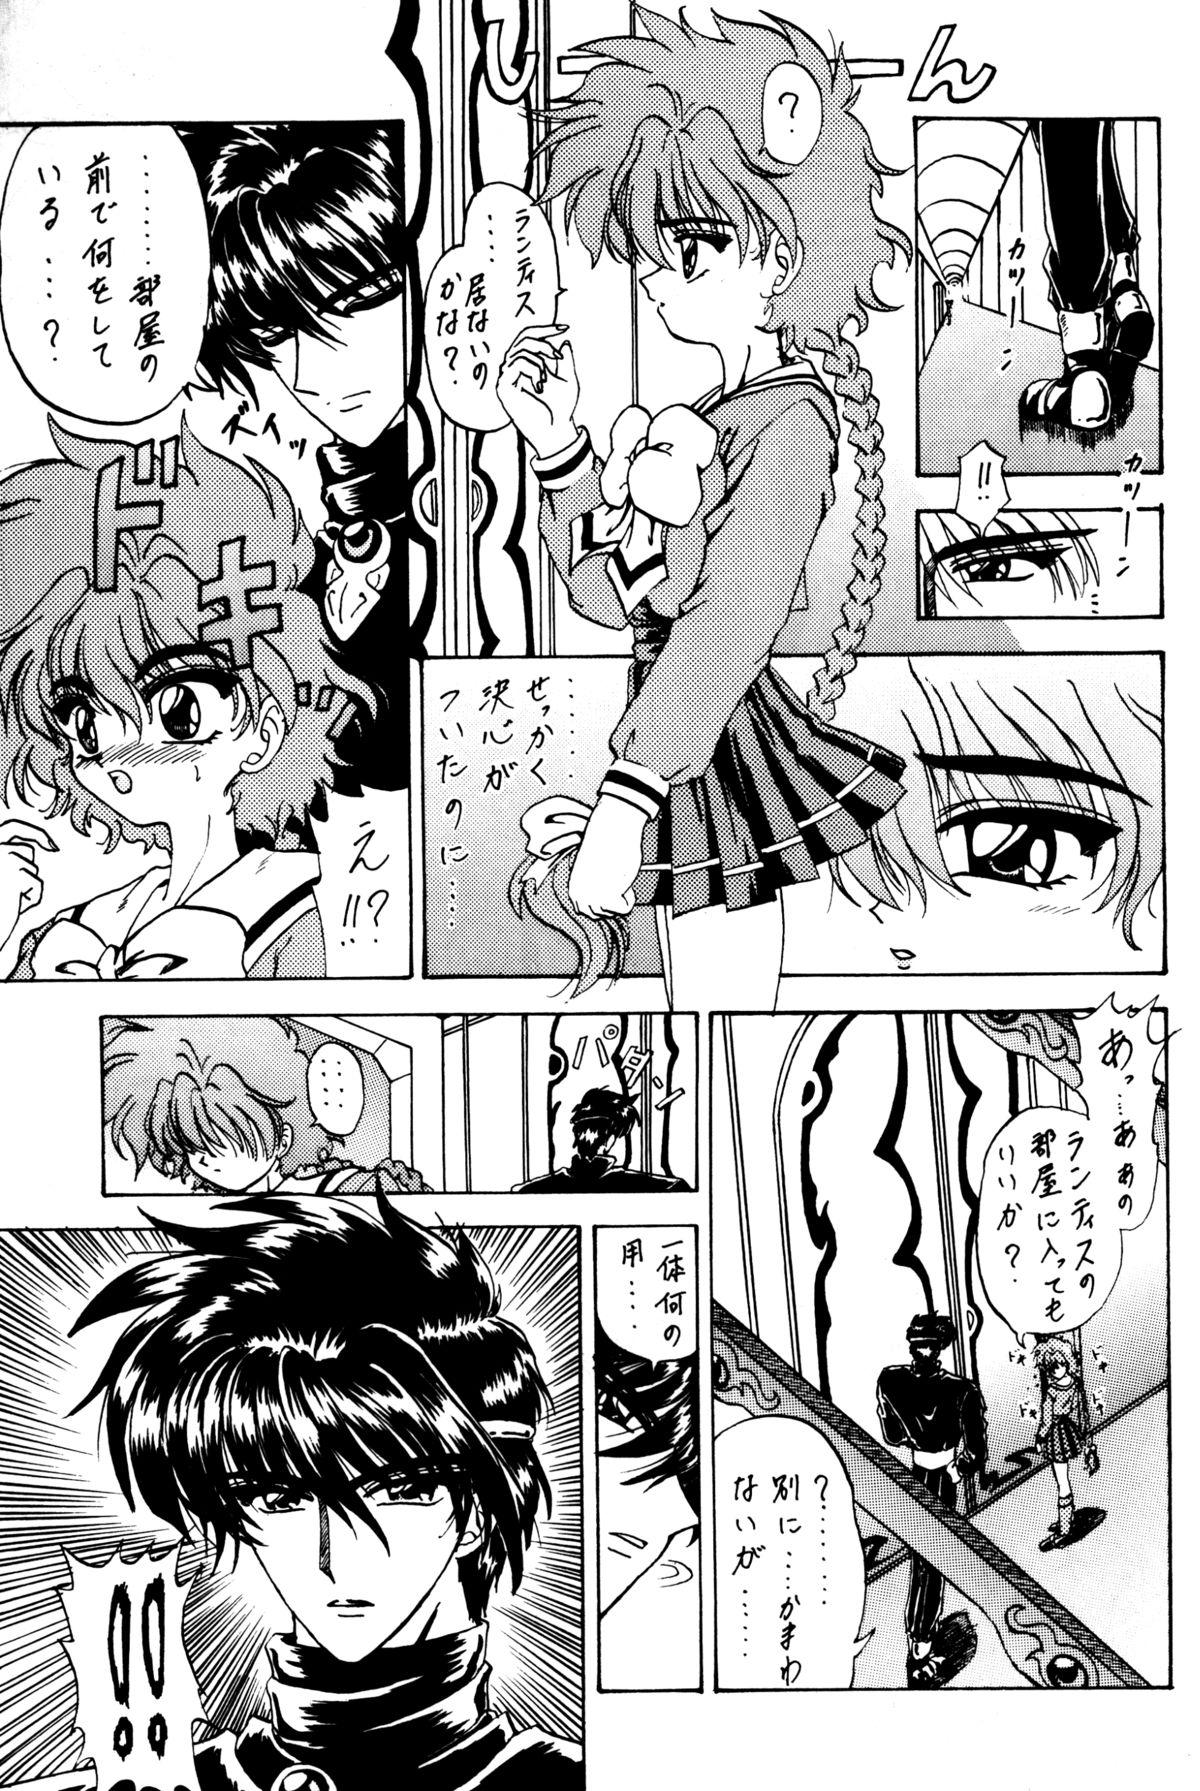 Exotic Stale World II - Magic knight rayearth Tight Pussy - Page 12